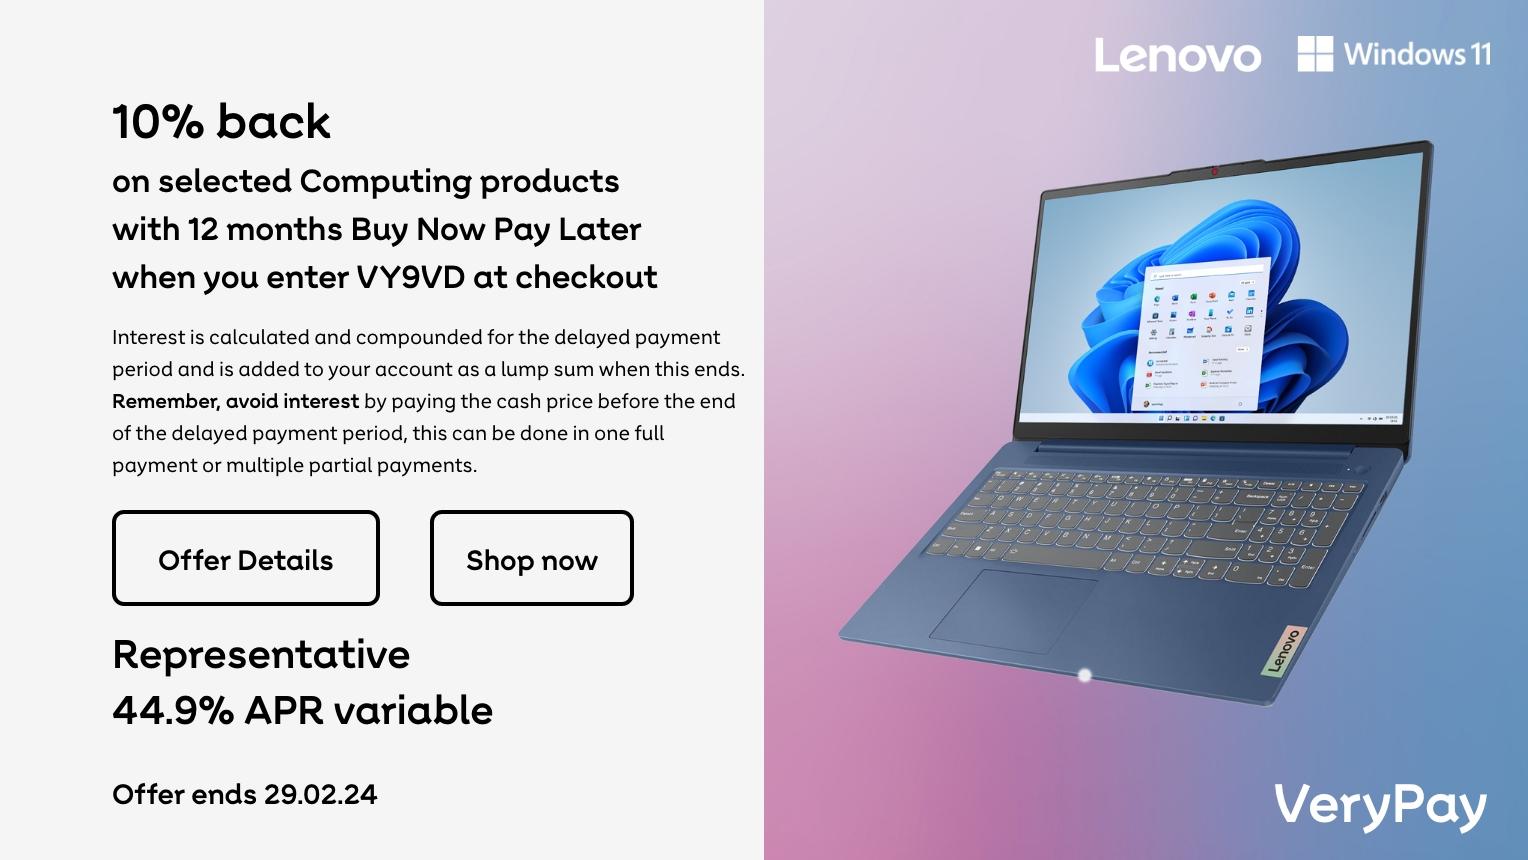 10% back on selected Computing products with 12 months Buy Now Pay Later when you enter VY9VD at checkout. Offer Ends 29.02.24